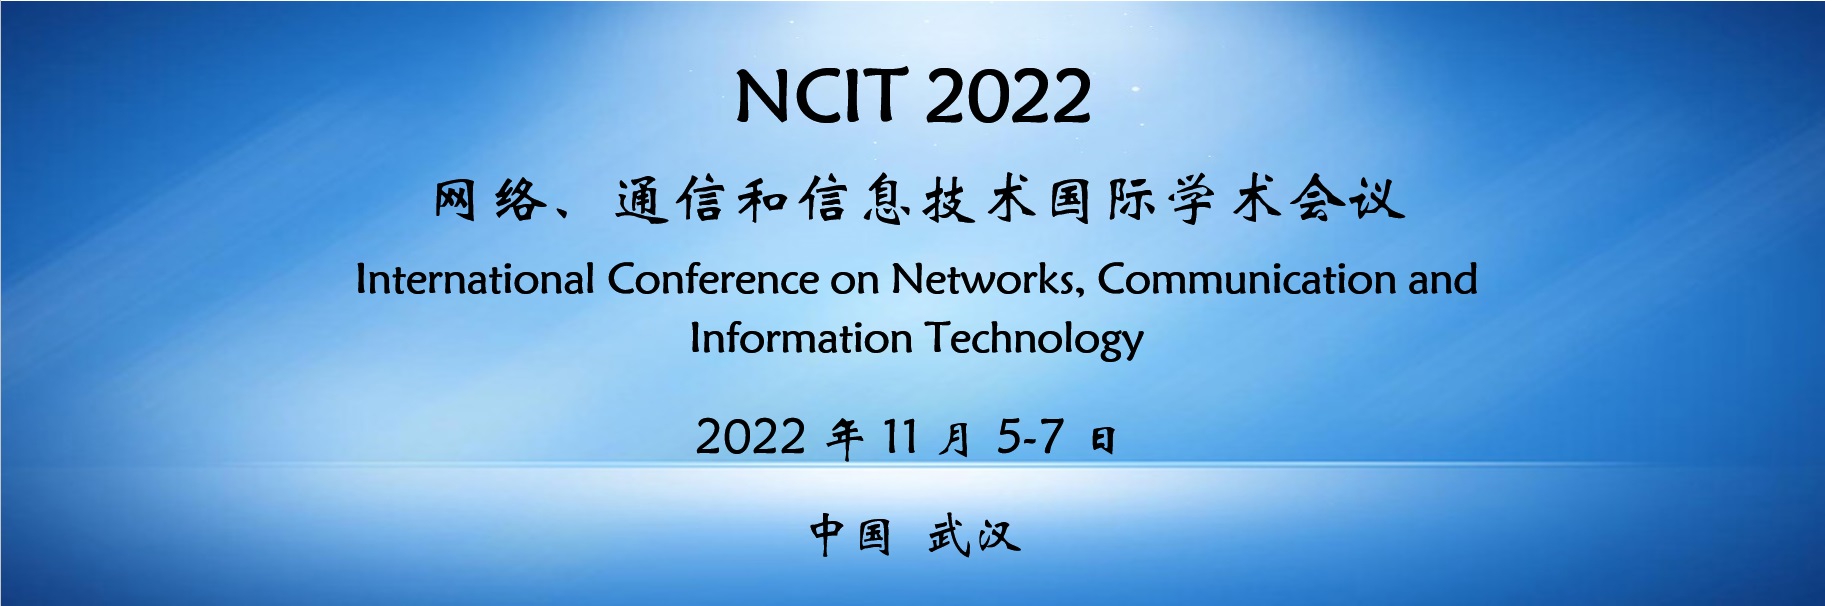 International Conference on Networks, Communication and Information Technology